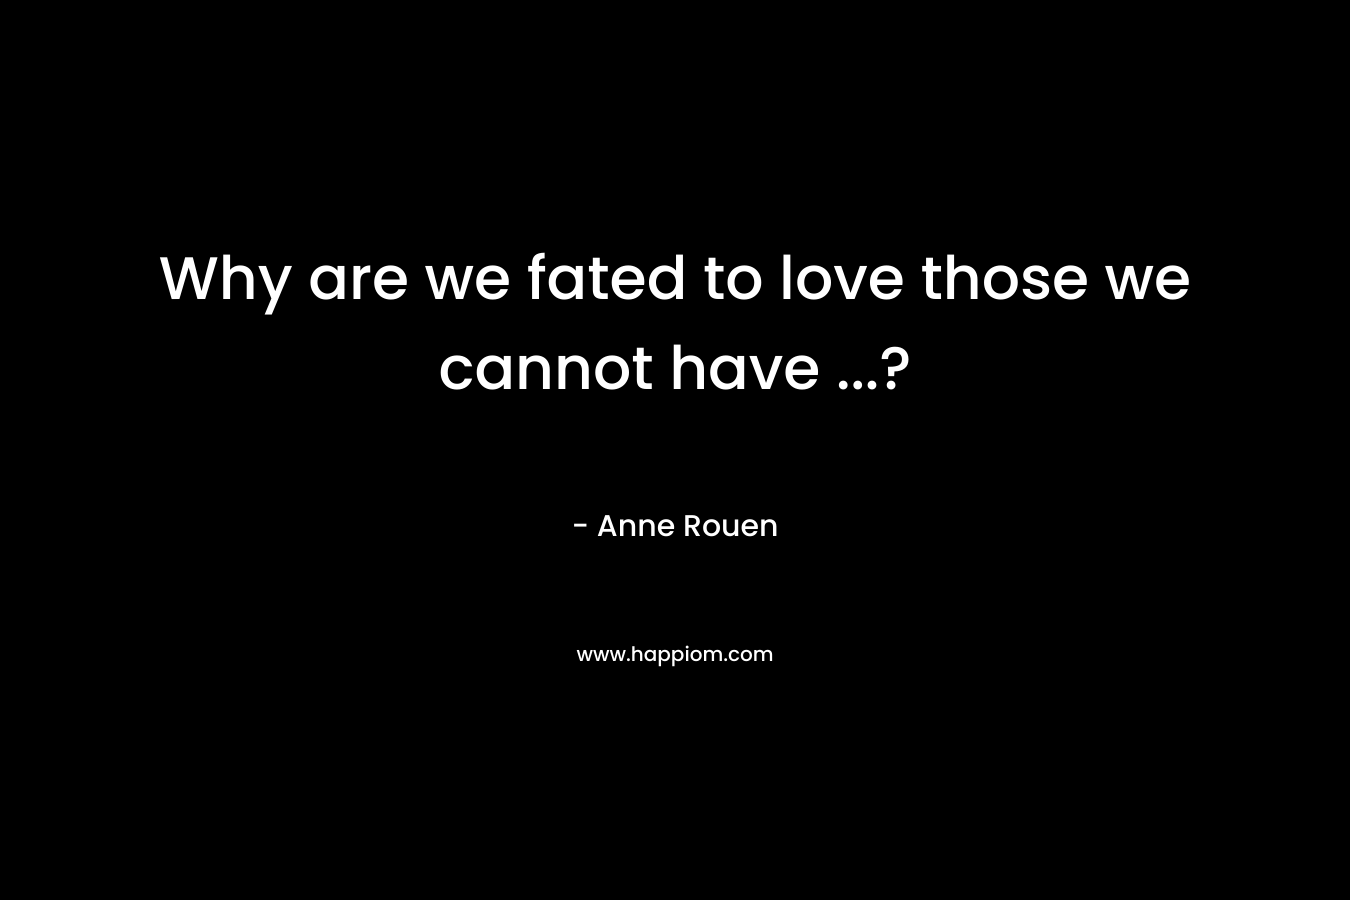 Why are we fated to love those we cannot have ...?